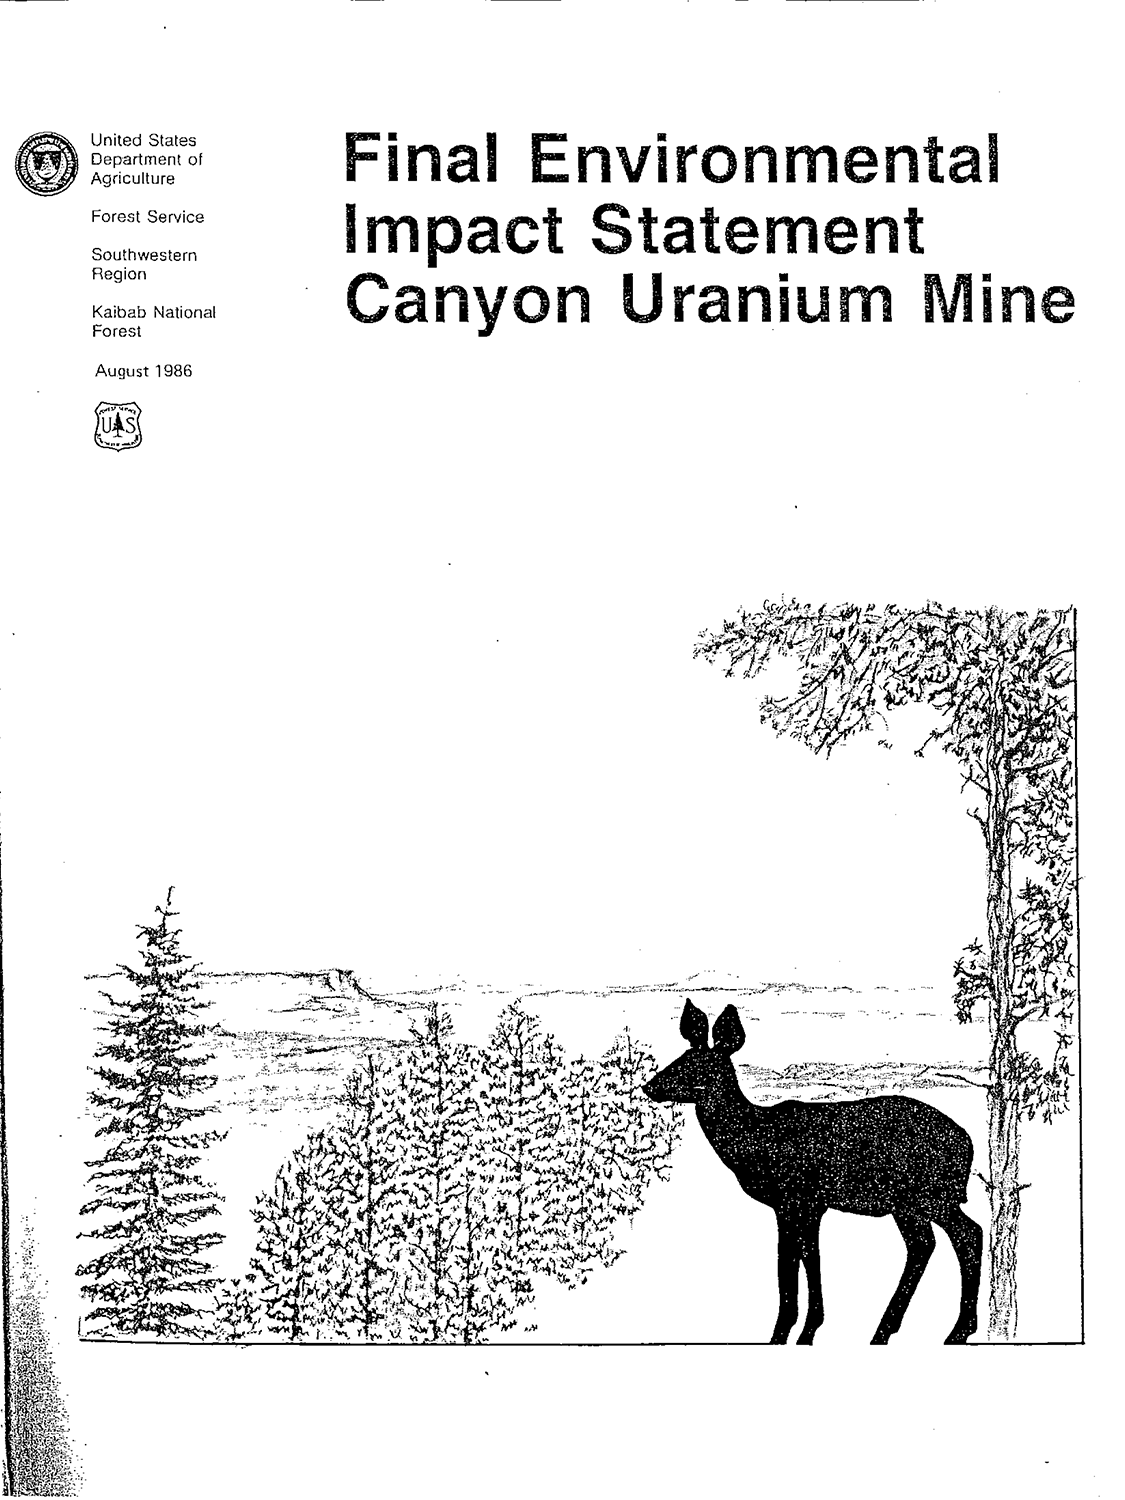 Final environmental impact statement for Canyon Mine